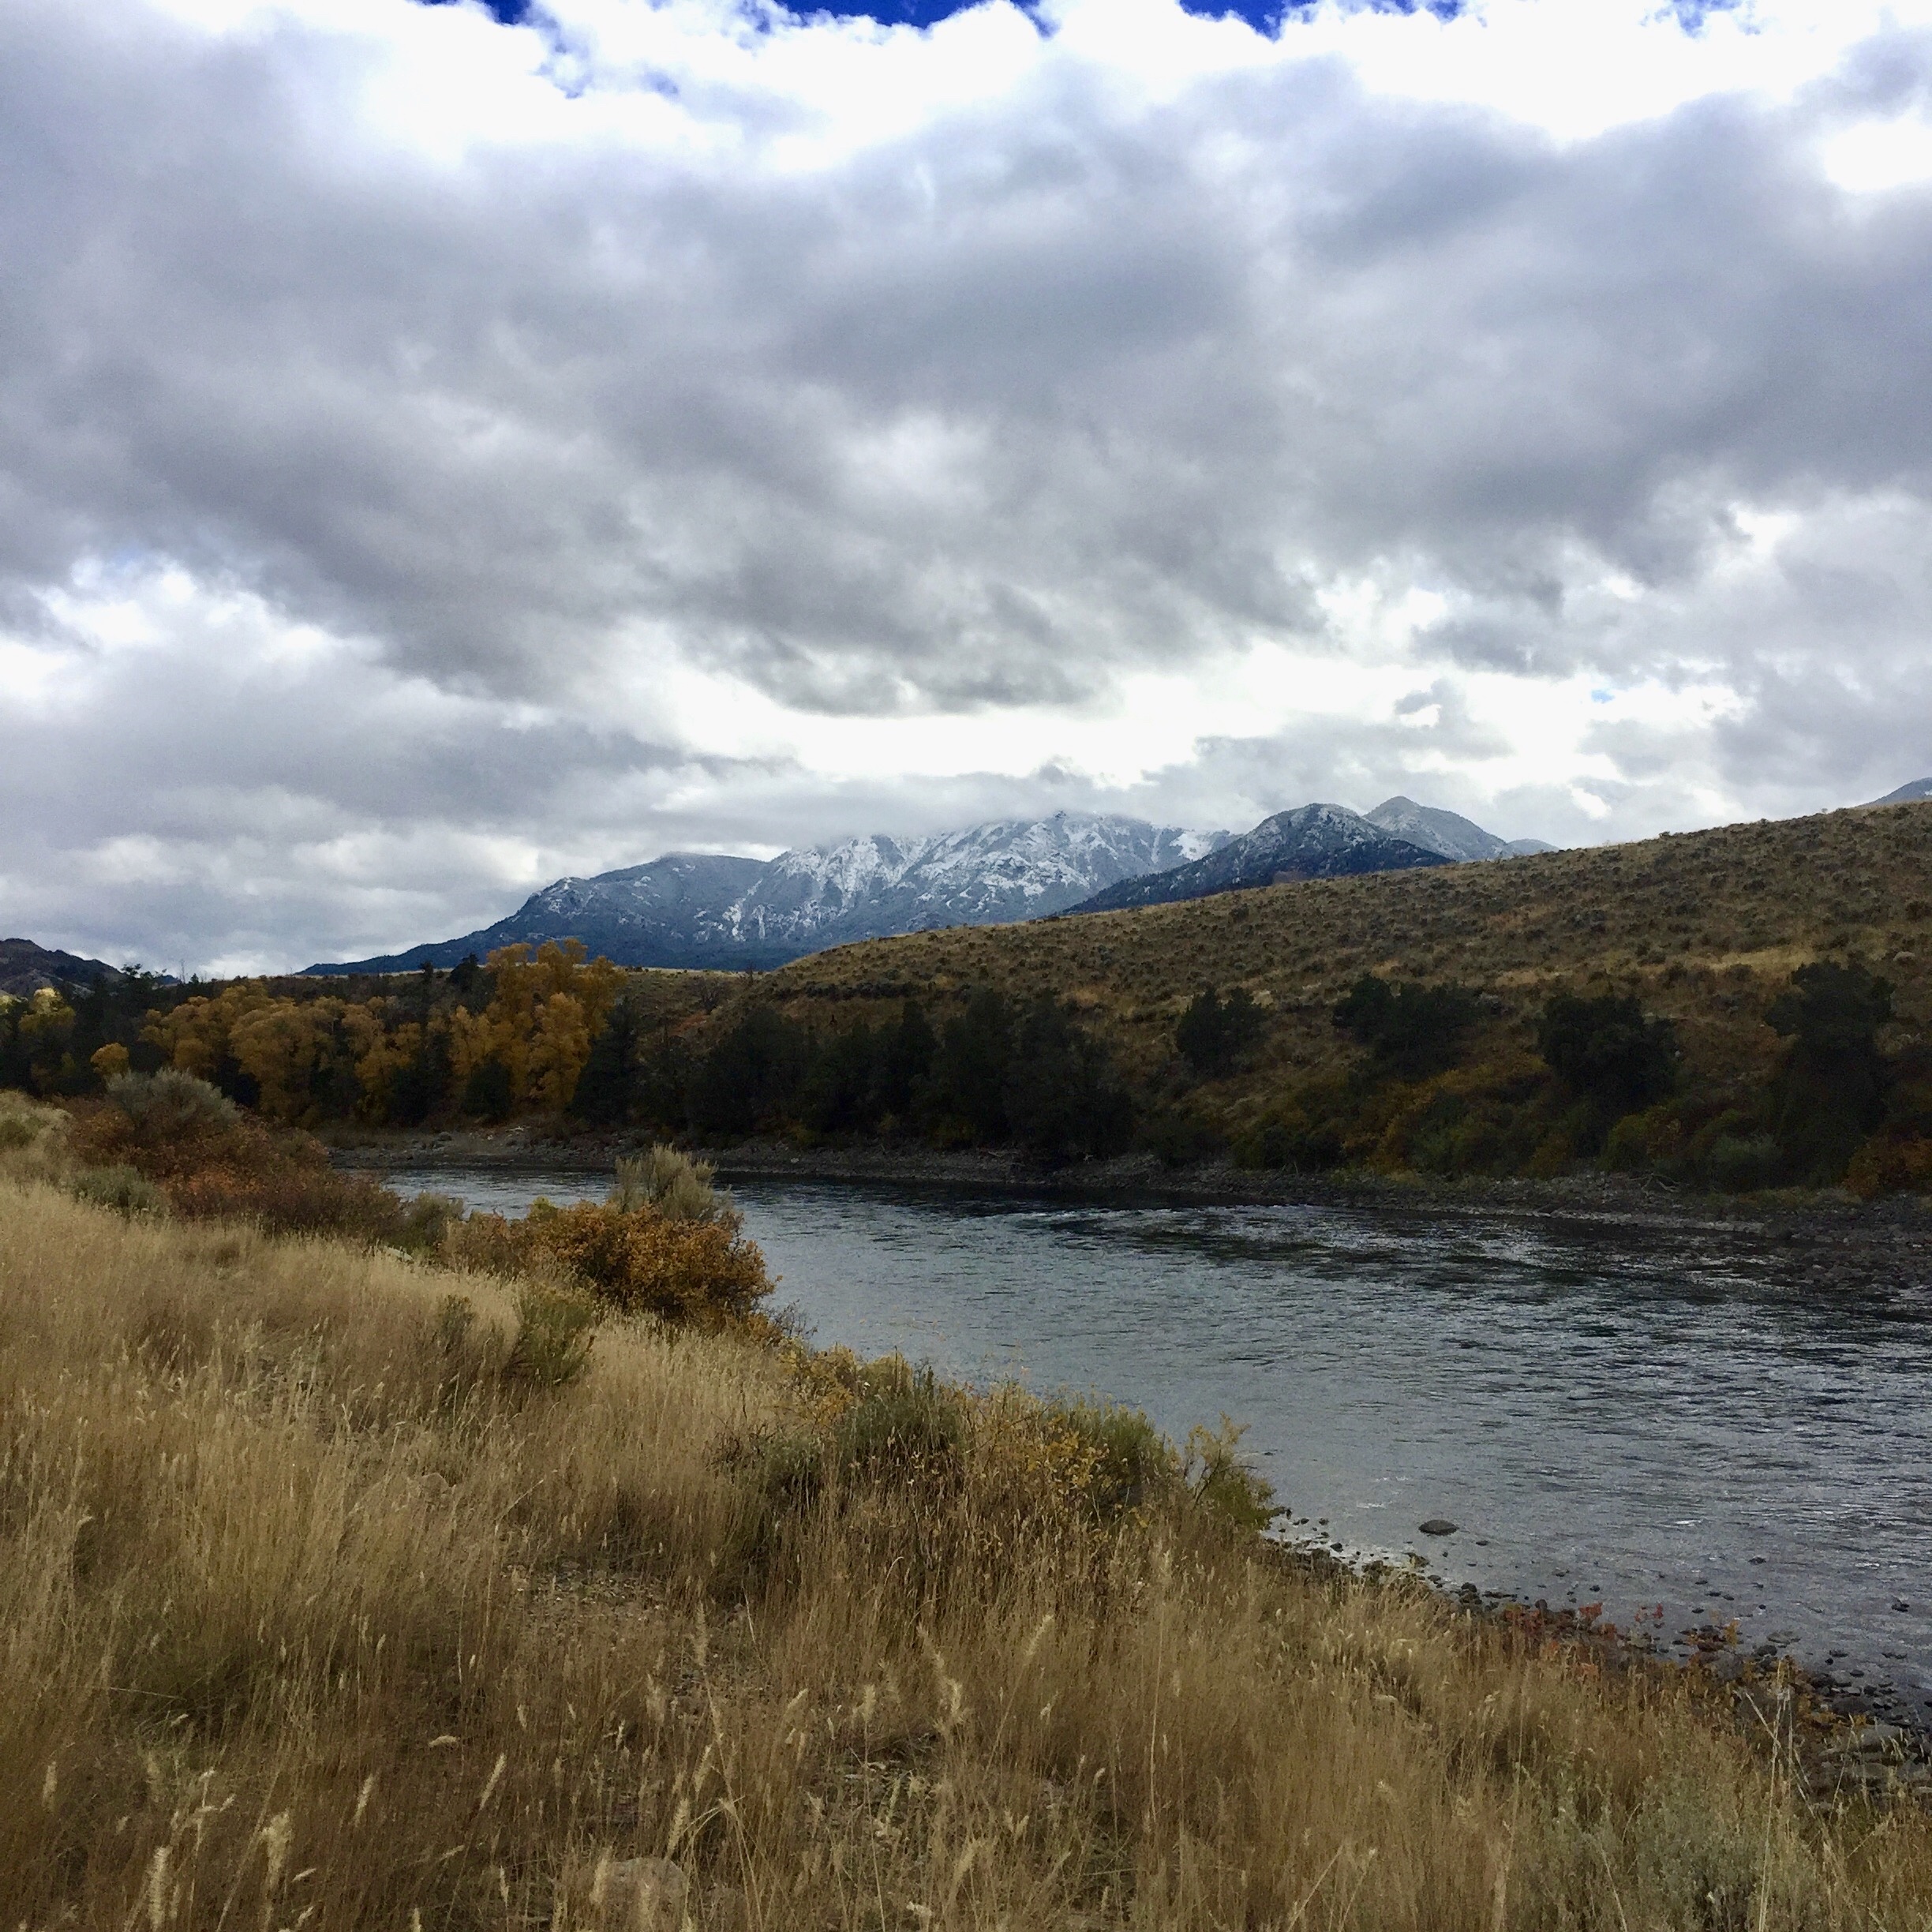 Landscape of the Yellowstone River with mountains in the background. Photo courtesy of Joshua Sie.